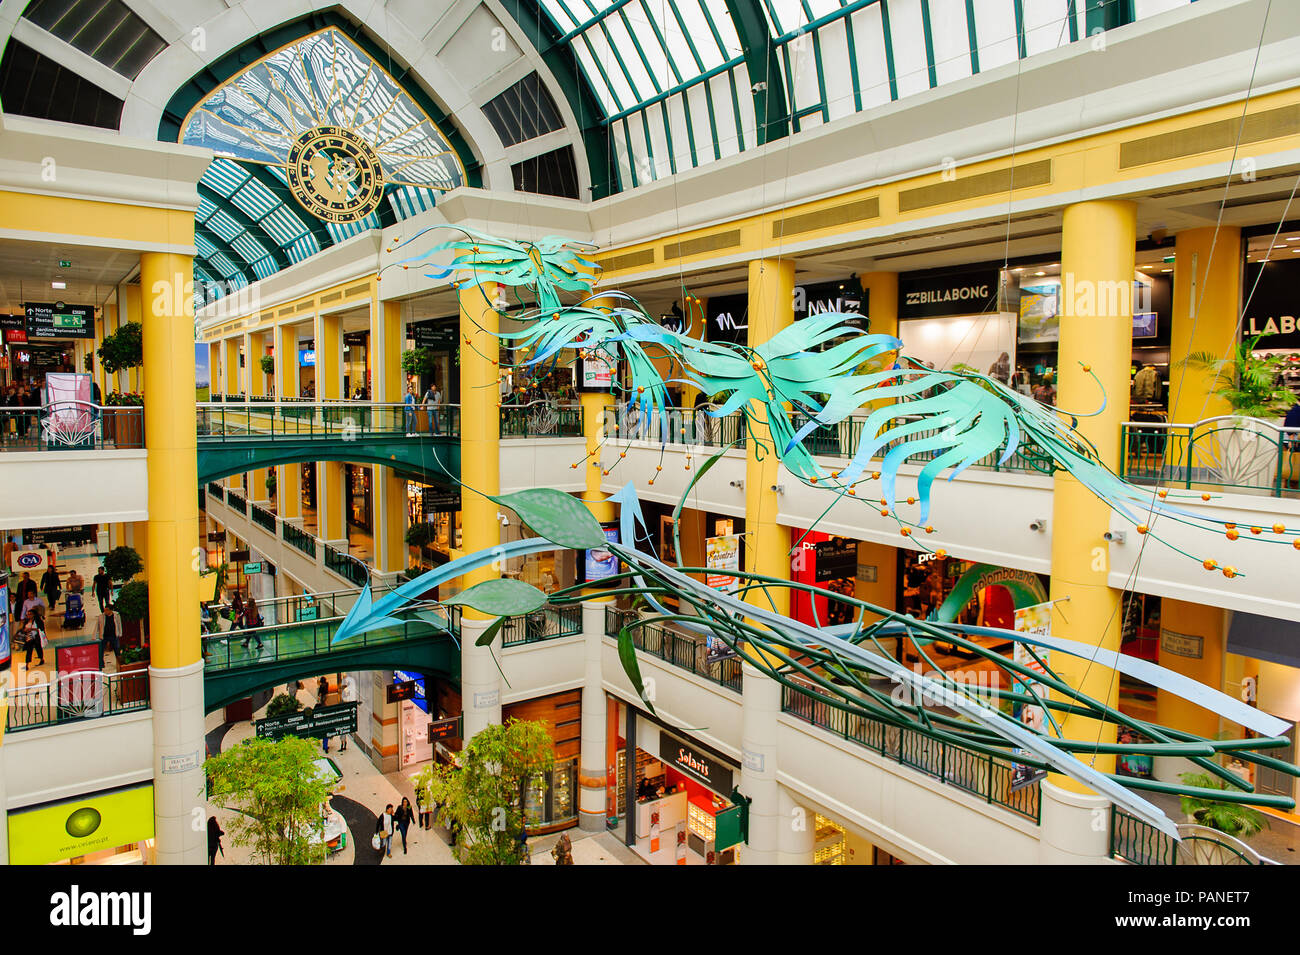 LISBON, PORTUGAL - OCT 17, 2016: Interior of the Centro Colombo, a famous shopping  centre in Lisbon. It opened on 15 September 1997 Stock Photo - Alamy